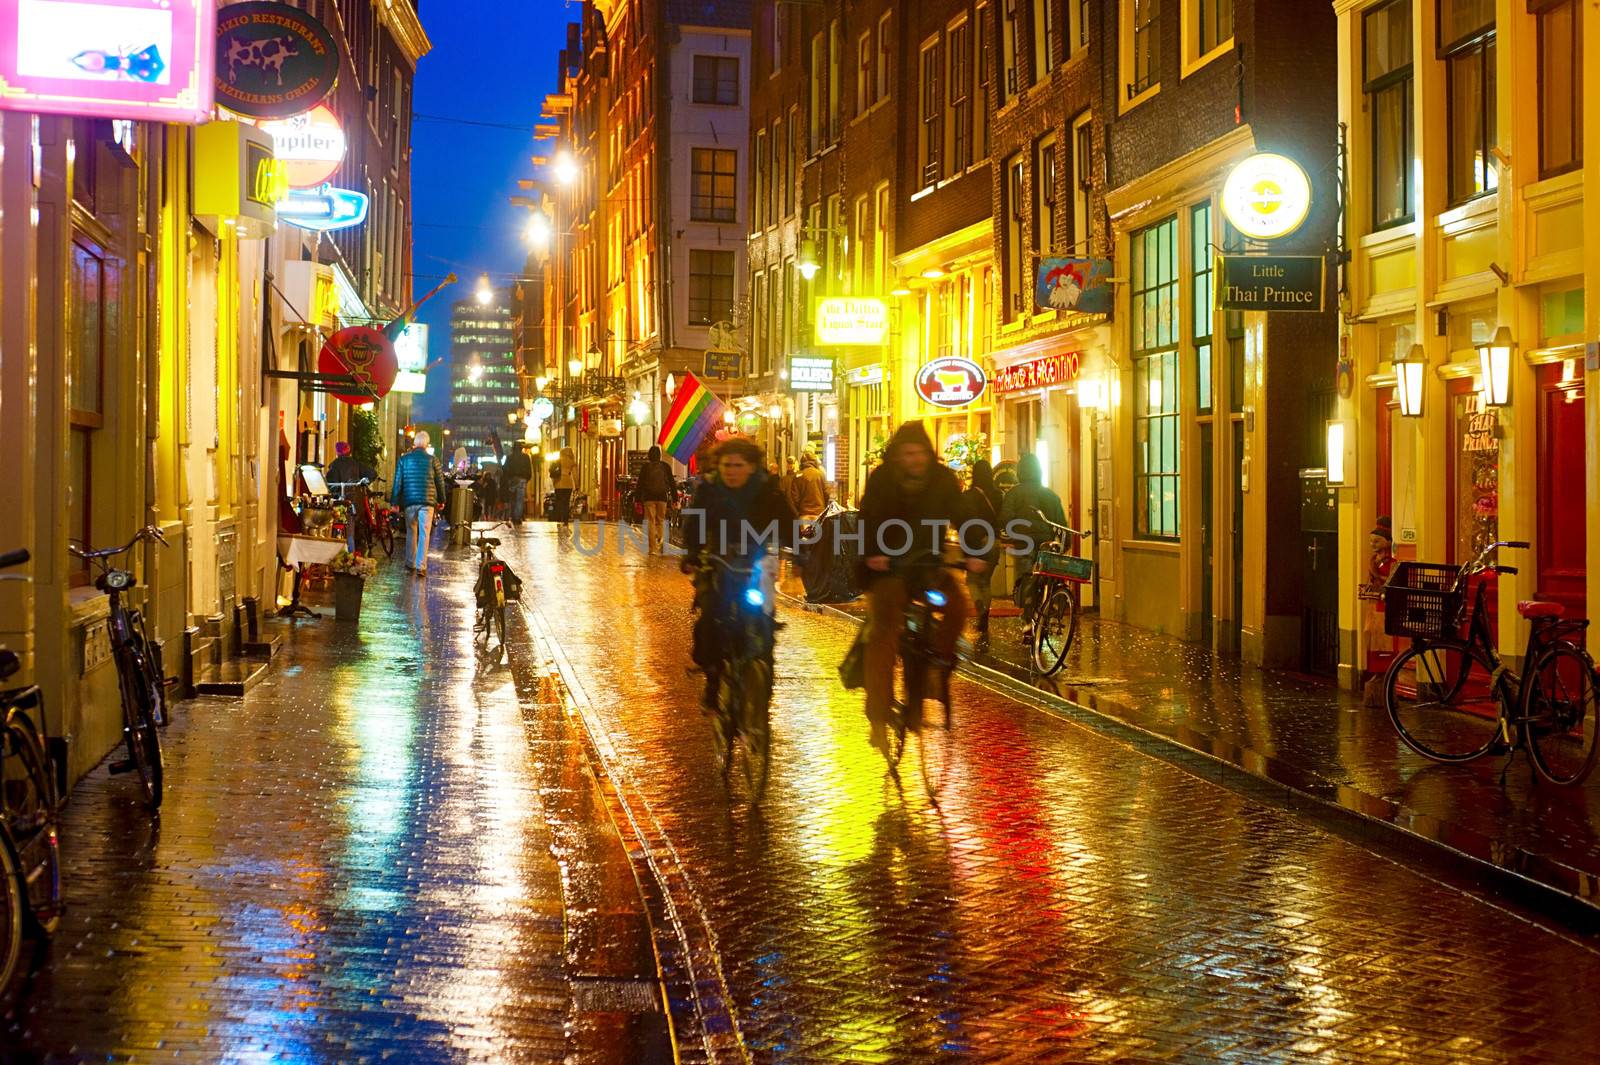 AMSTERDAM, NETHERLANDS - FEB 14, 2014: Unidentified people on the street of an old town of Amsterdam in the evening under the rain.